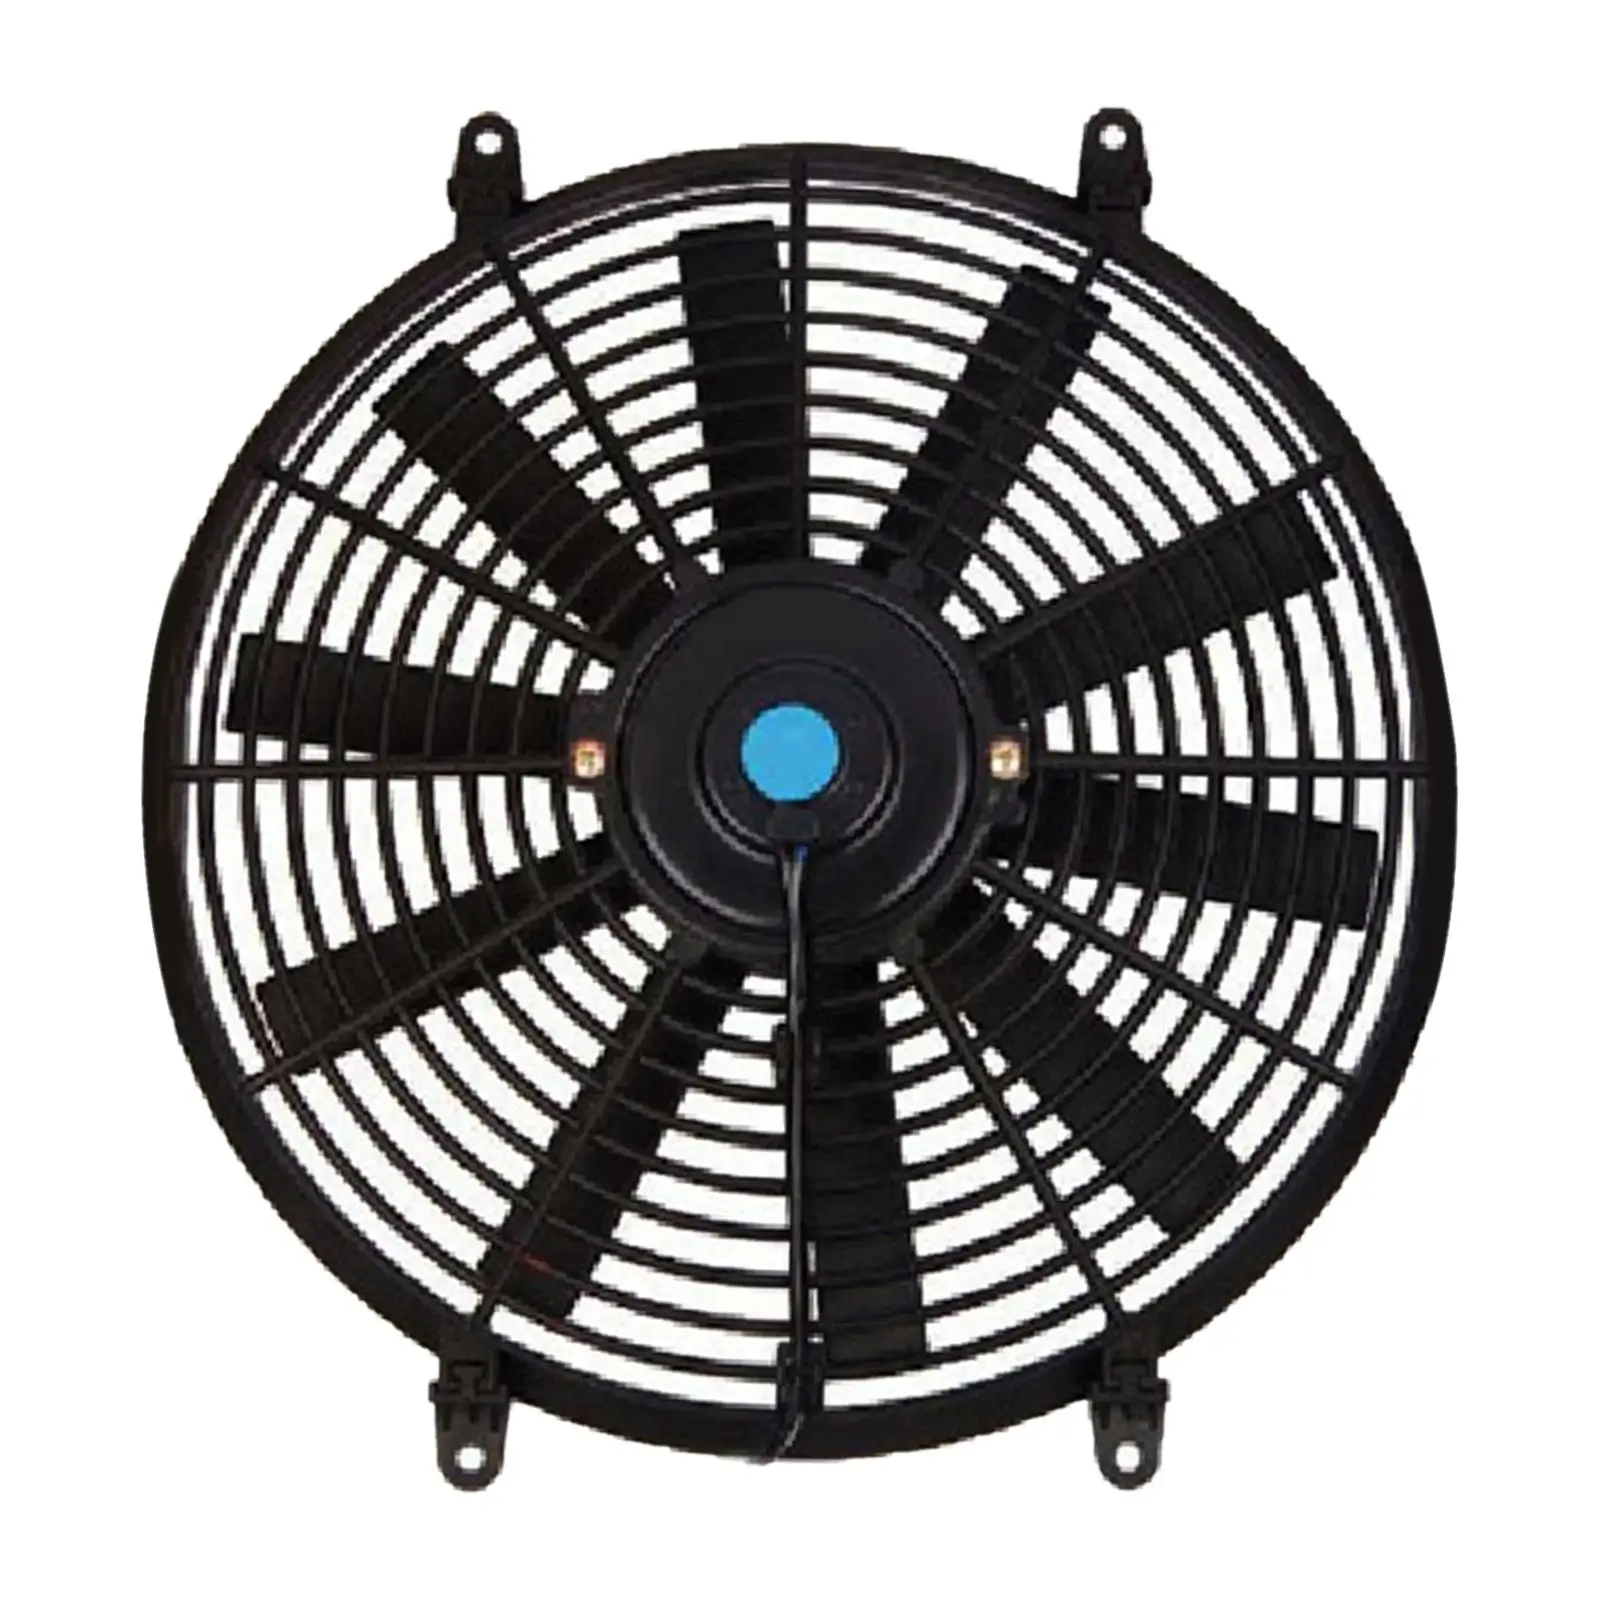 14inch Car Cooling Fan Sturdy Water Tank Heat Dissipation Fan for Vehicle Replacement Spare Parts Assembly Accessories